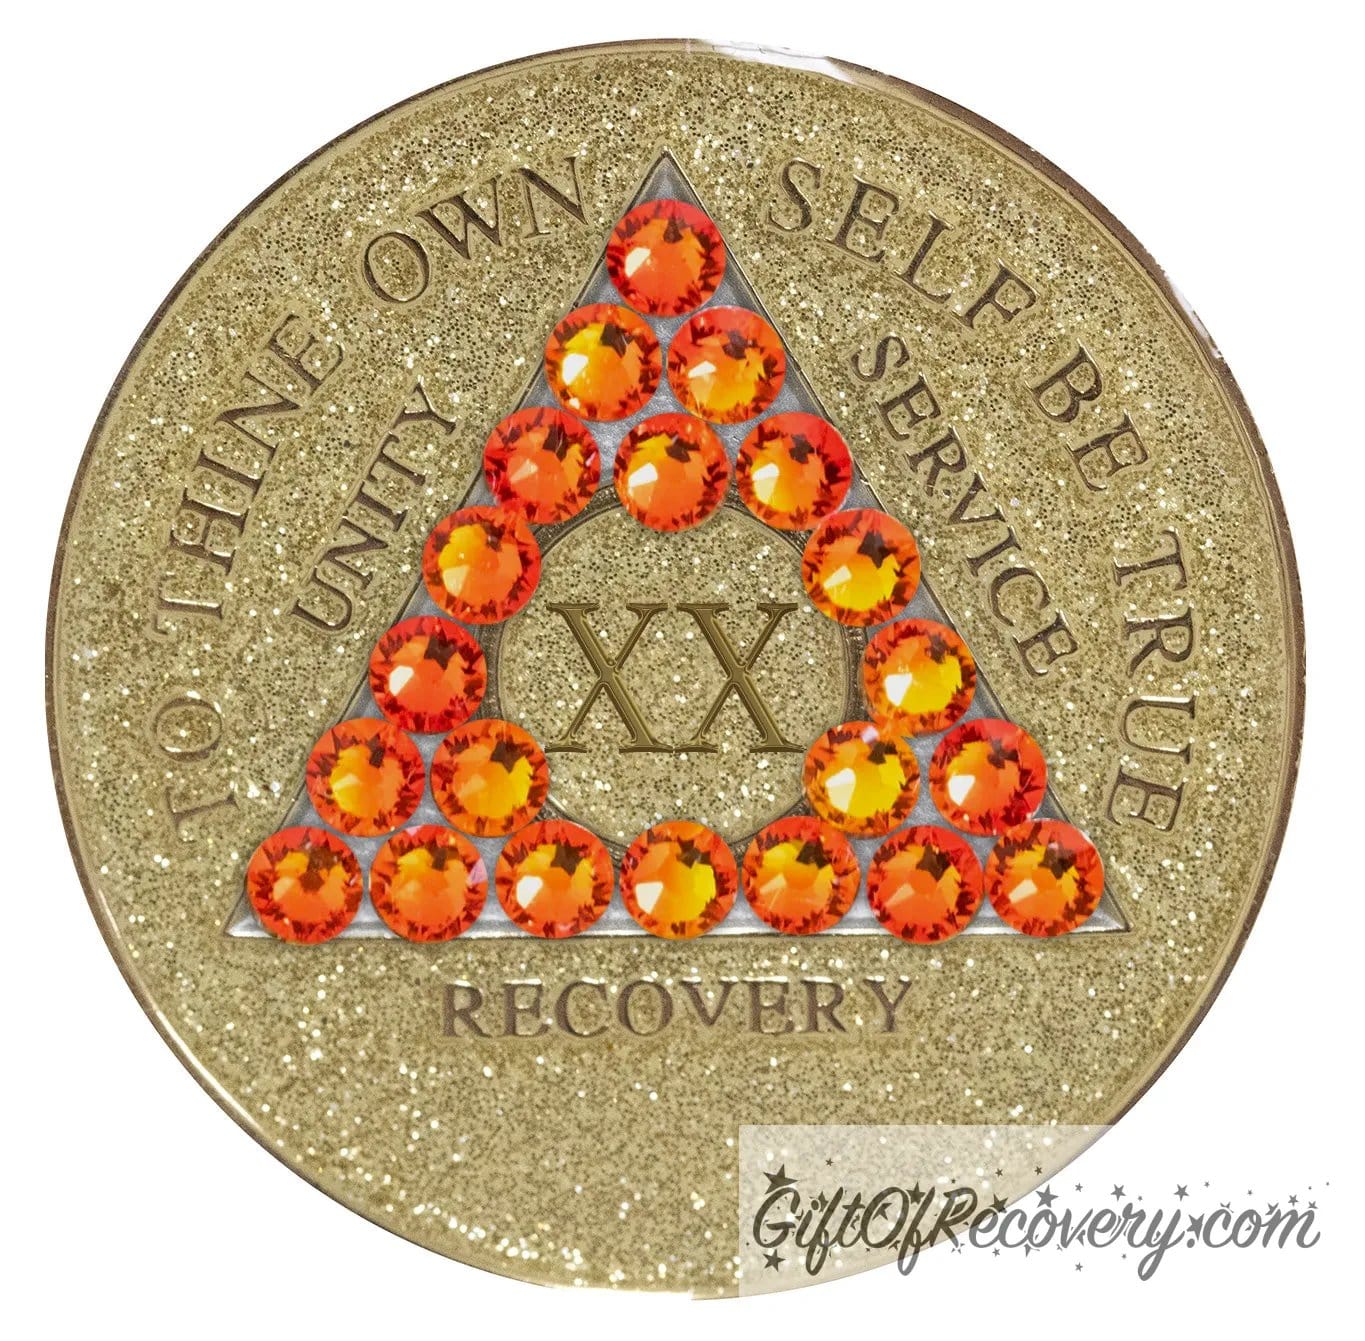 20 year Gold glitter AA medallion with twenty-one fire opal genuine crystals in the shape of a triangle, to thine own self be true, unity, service, recovery embossed in 14k gold-plated brass along with the rim of the medallion, sealed in a high-quality, chip and scratch-resistant resin dome giving it a beautiful glossy look that will last.